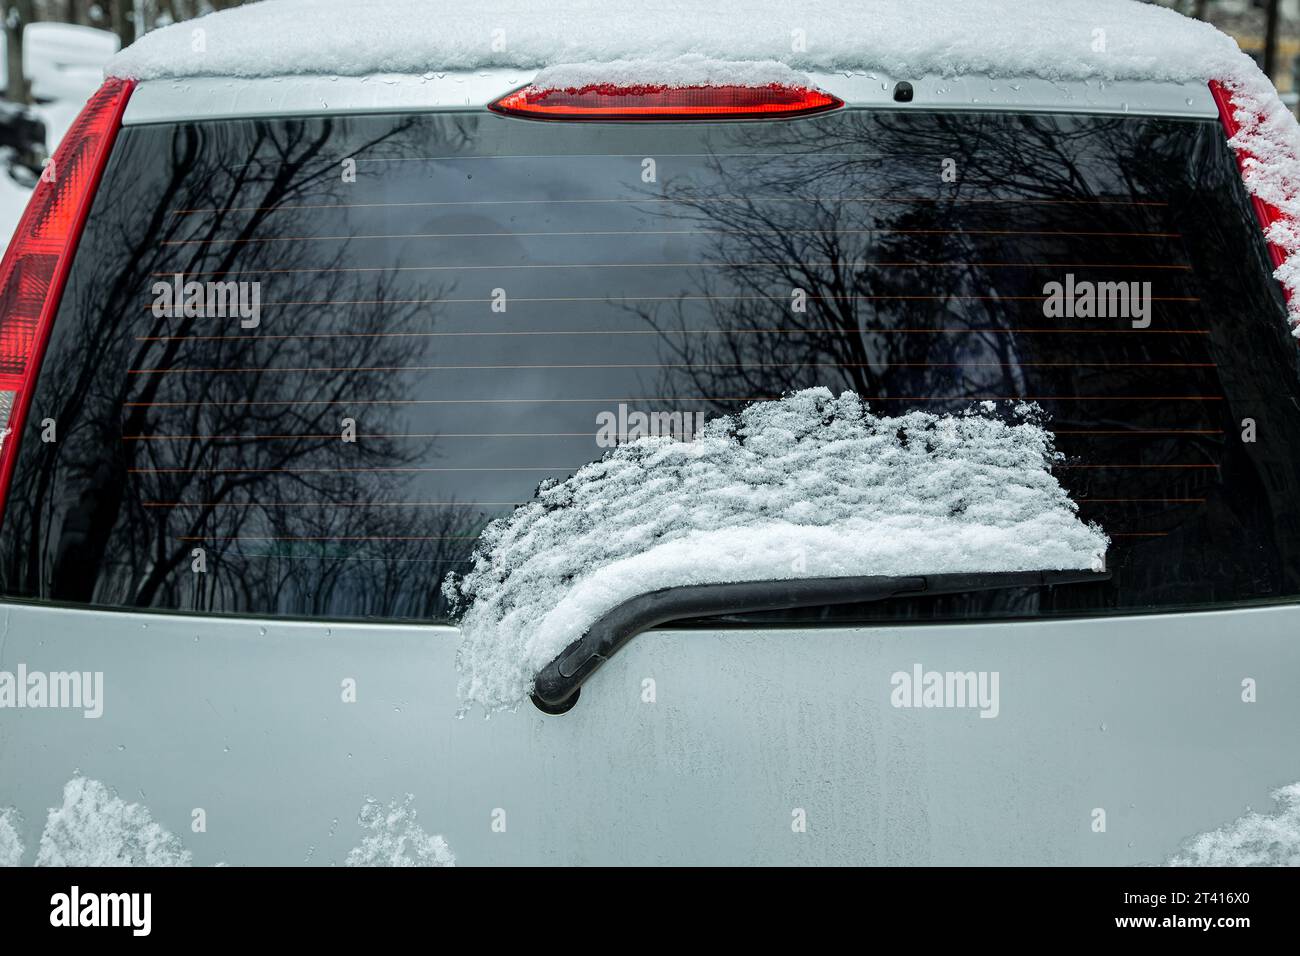 rear window of car with windshield wiper covered with snow and blocked, gray vehicle with red brake lights, nobody. Stock Photo